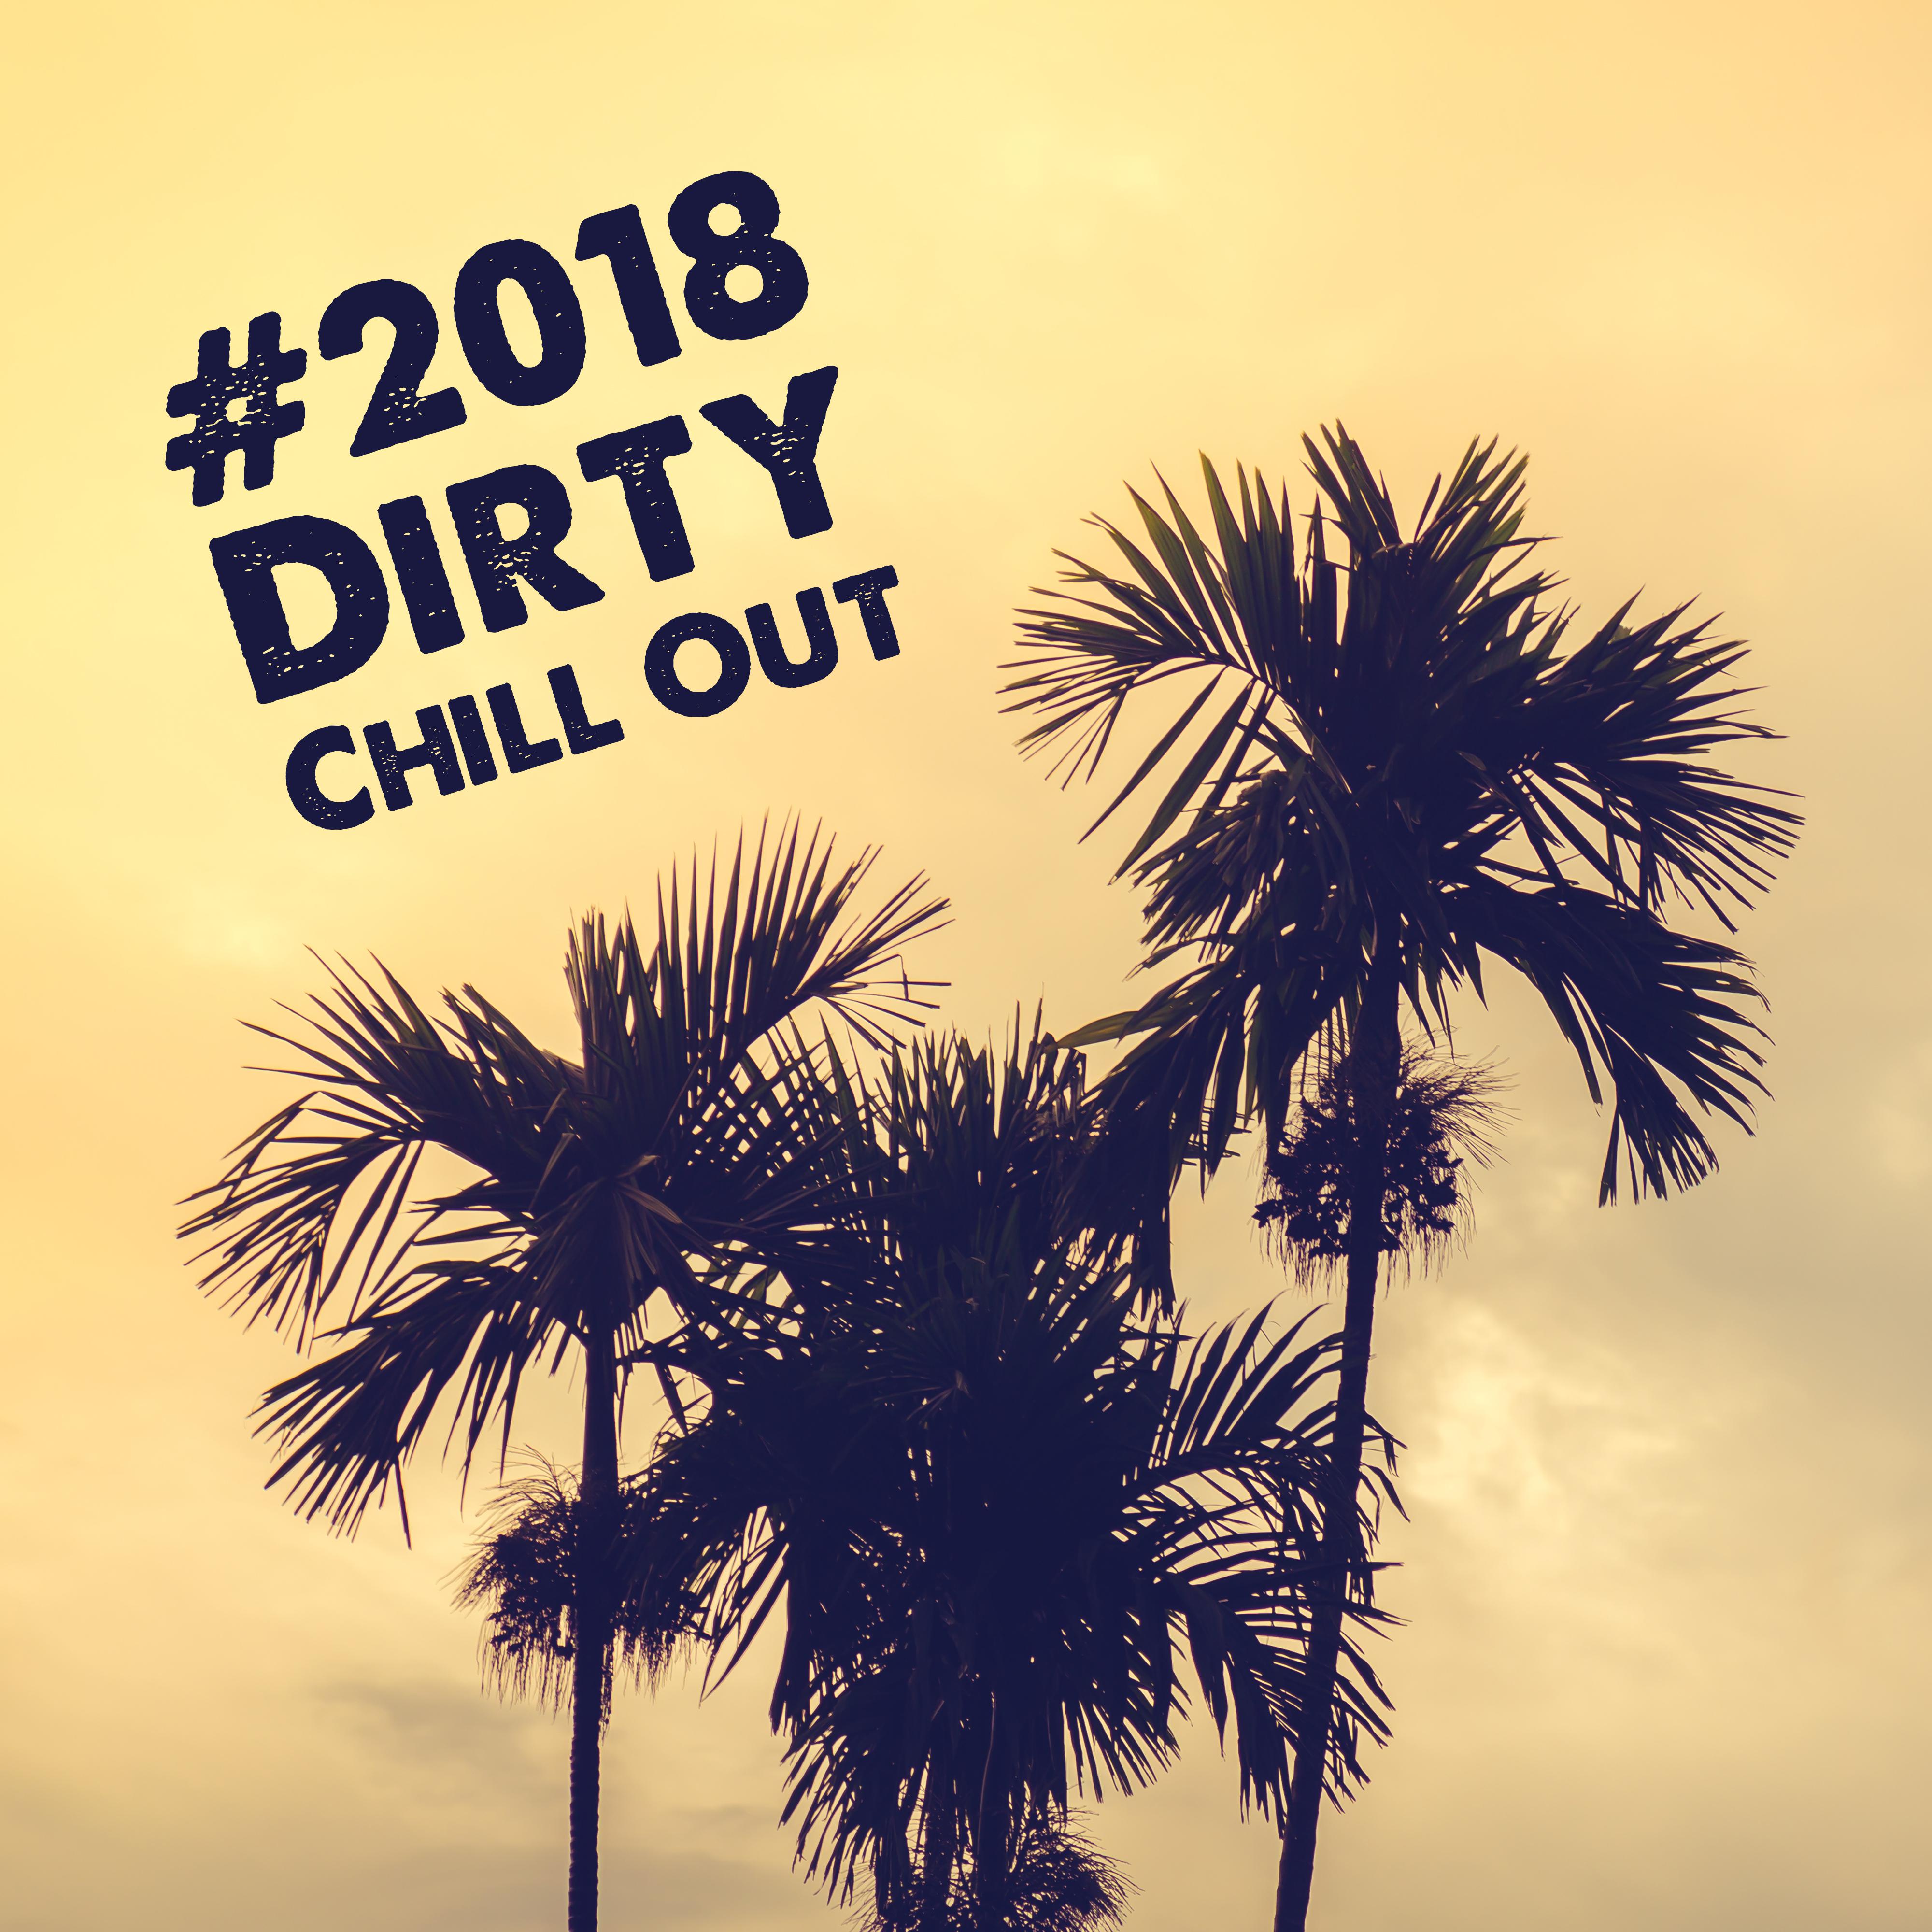 #2018 Dirty Chill Out